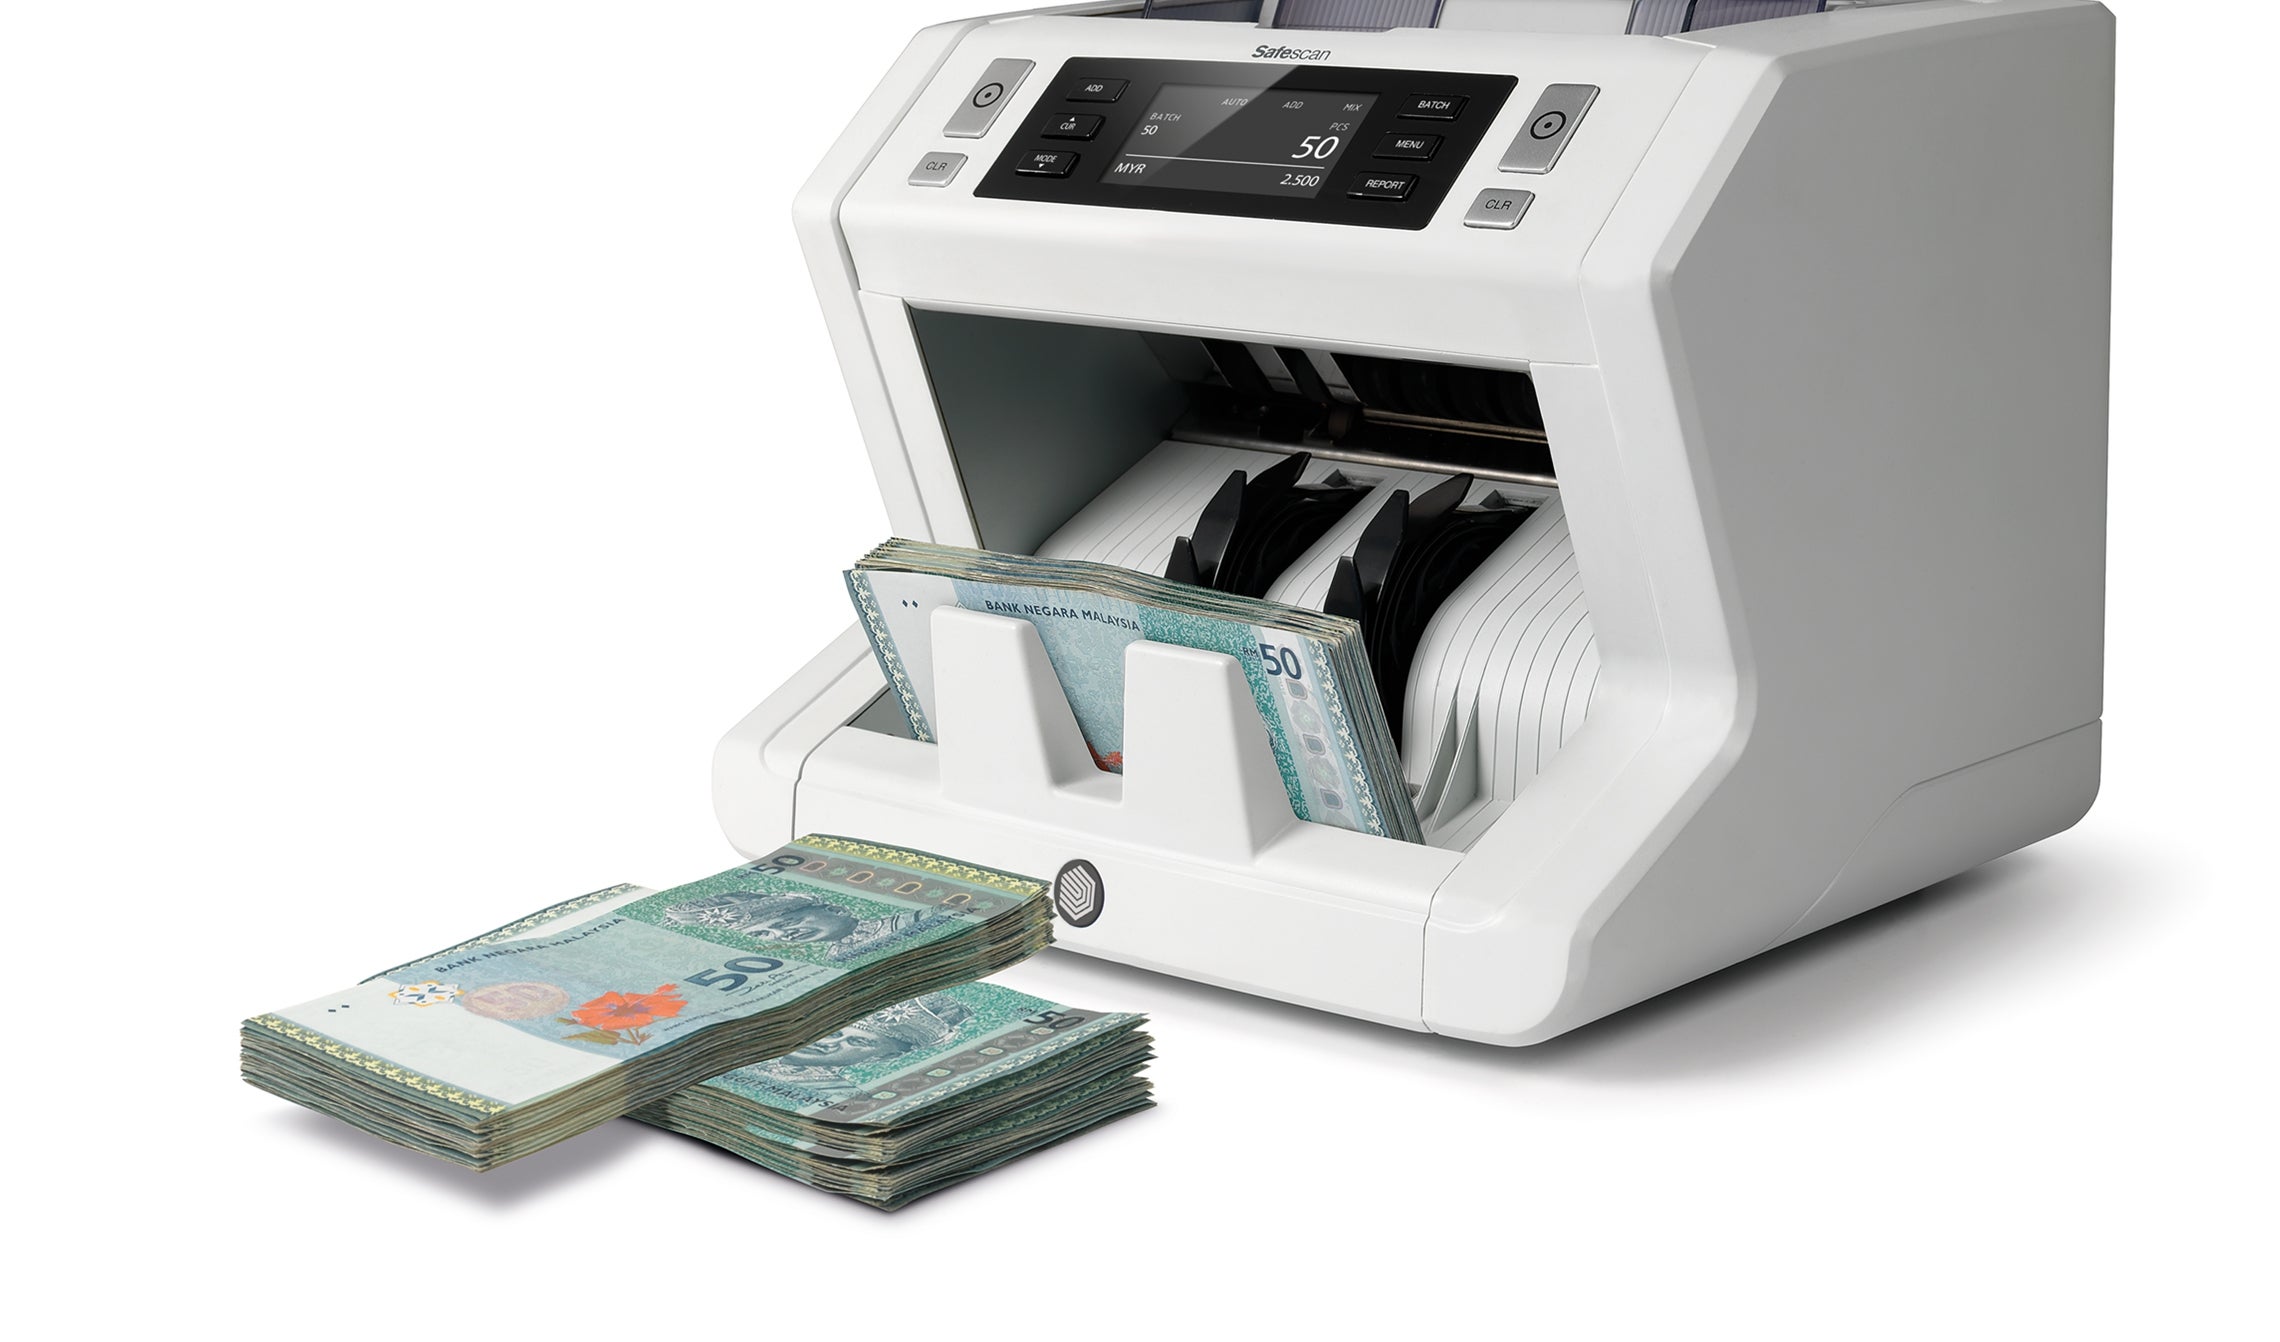 safescan-2685-s-banknote-counter